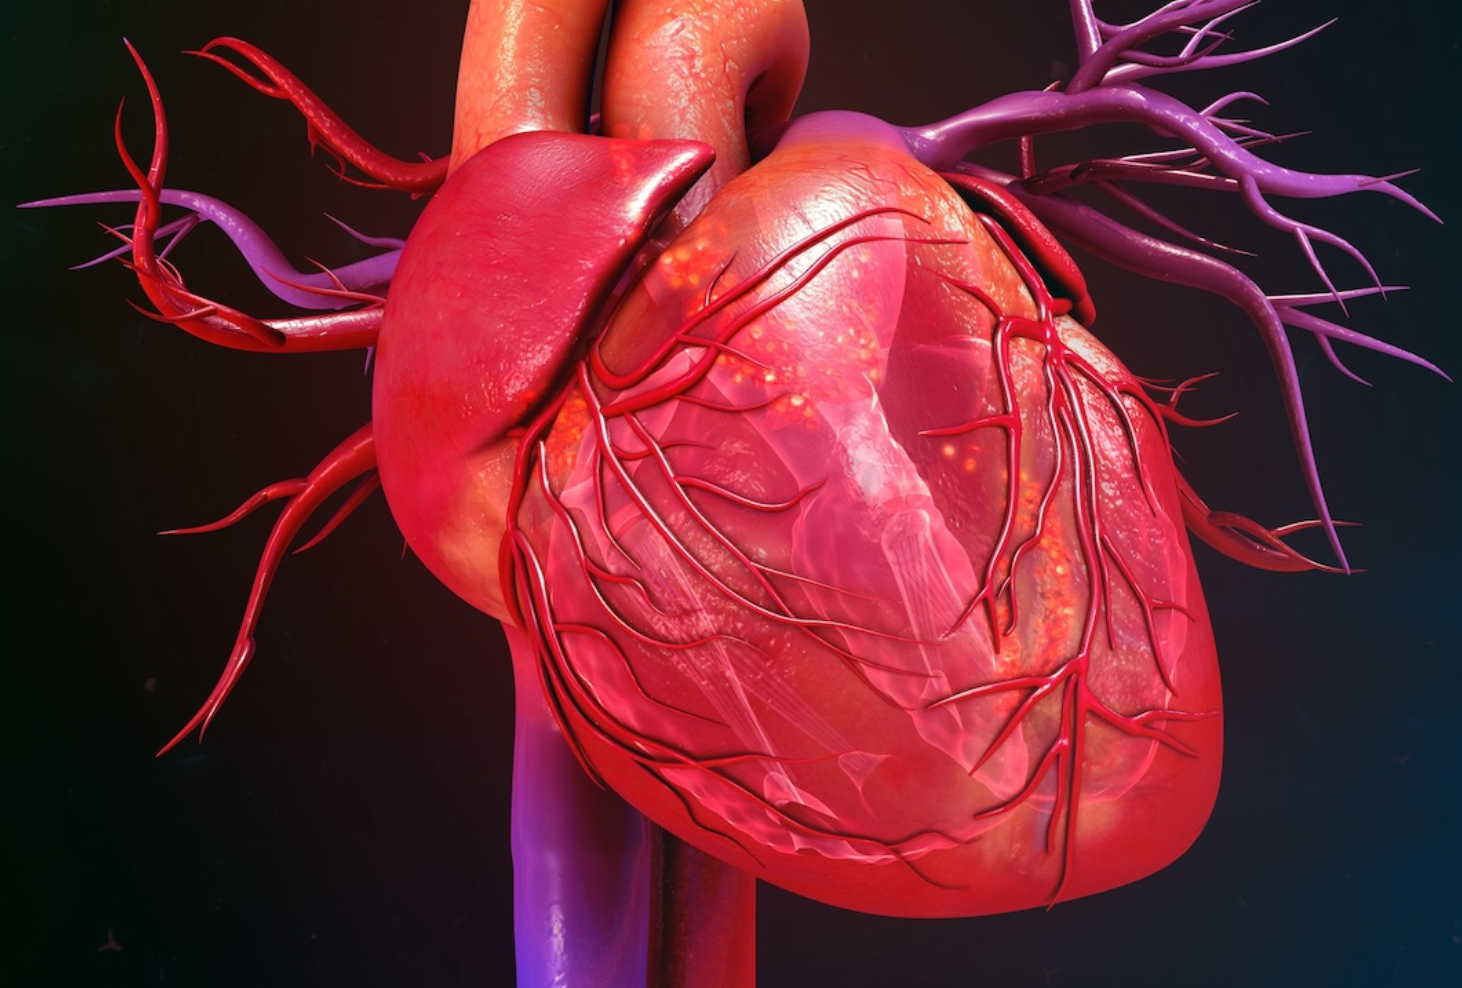 New Data From Trials of Evolocumab, Olpasiran Show Promise for Cardiovascular Disease Care